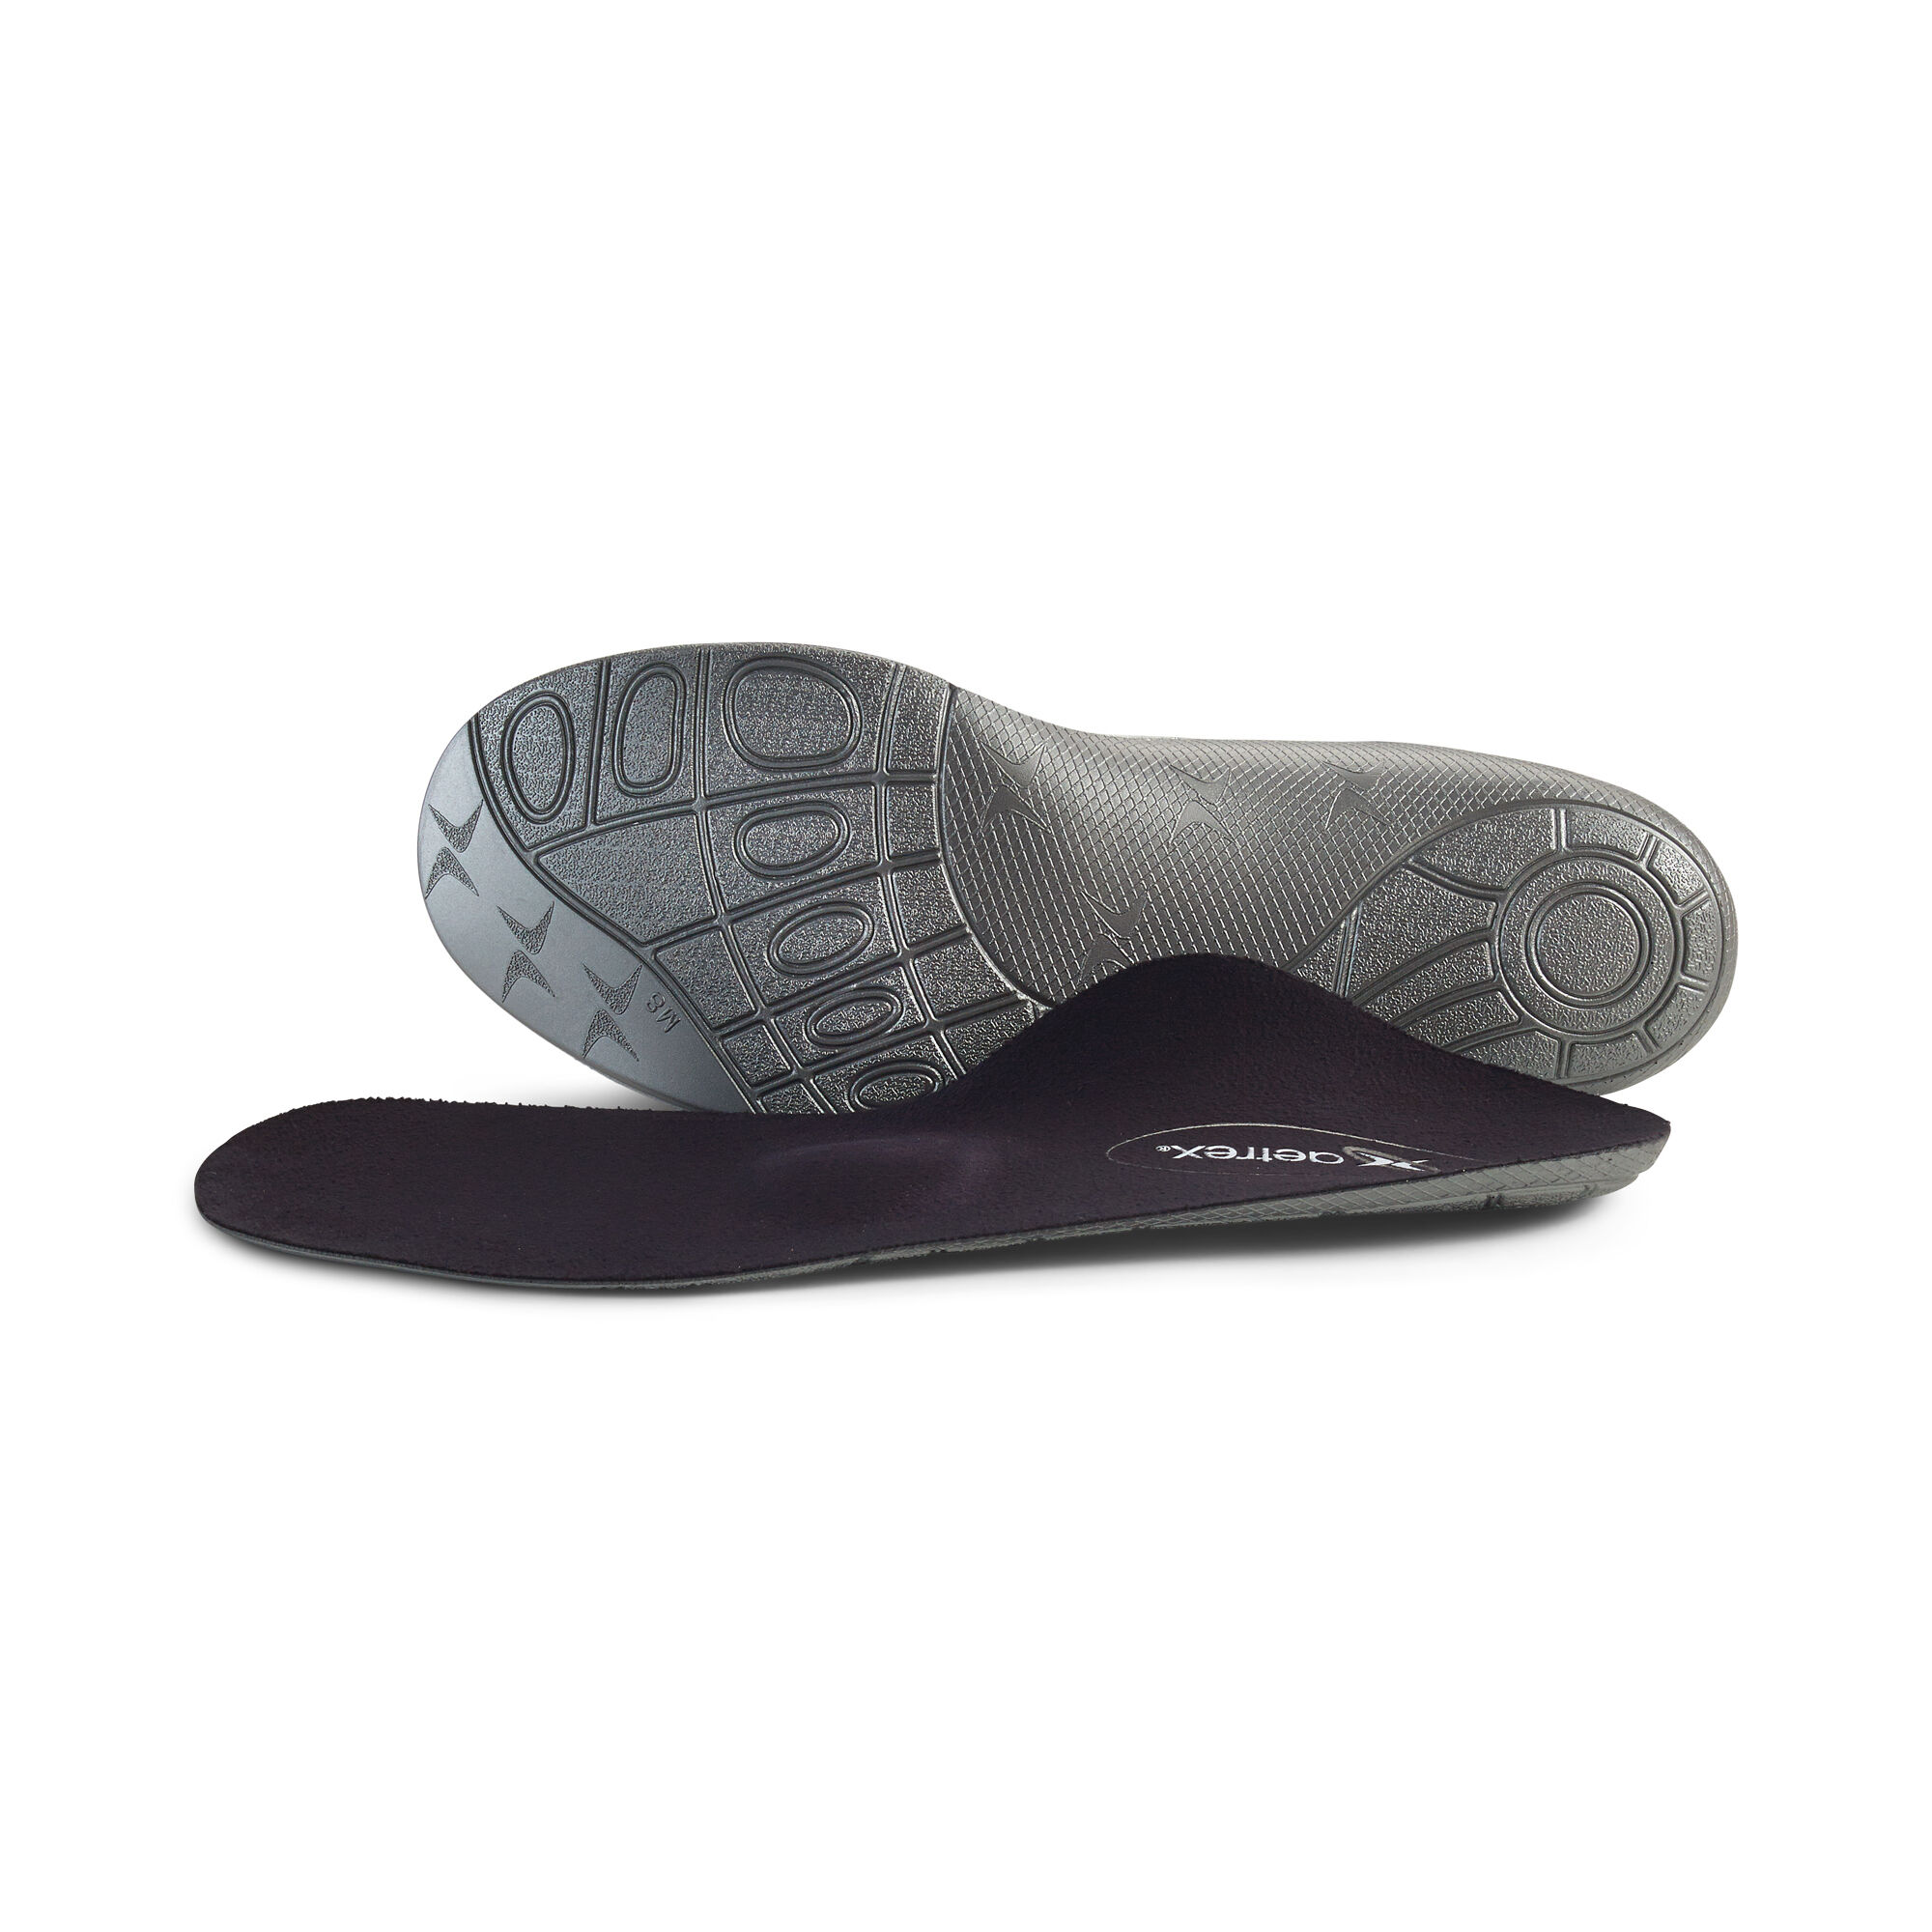 Men's Low Profile Med/High Arch W 